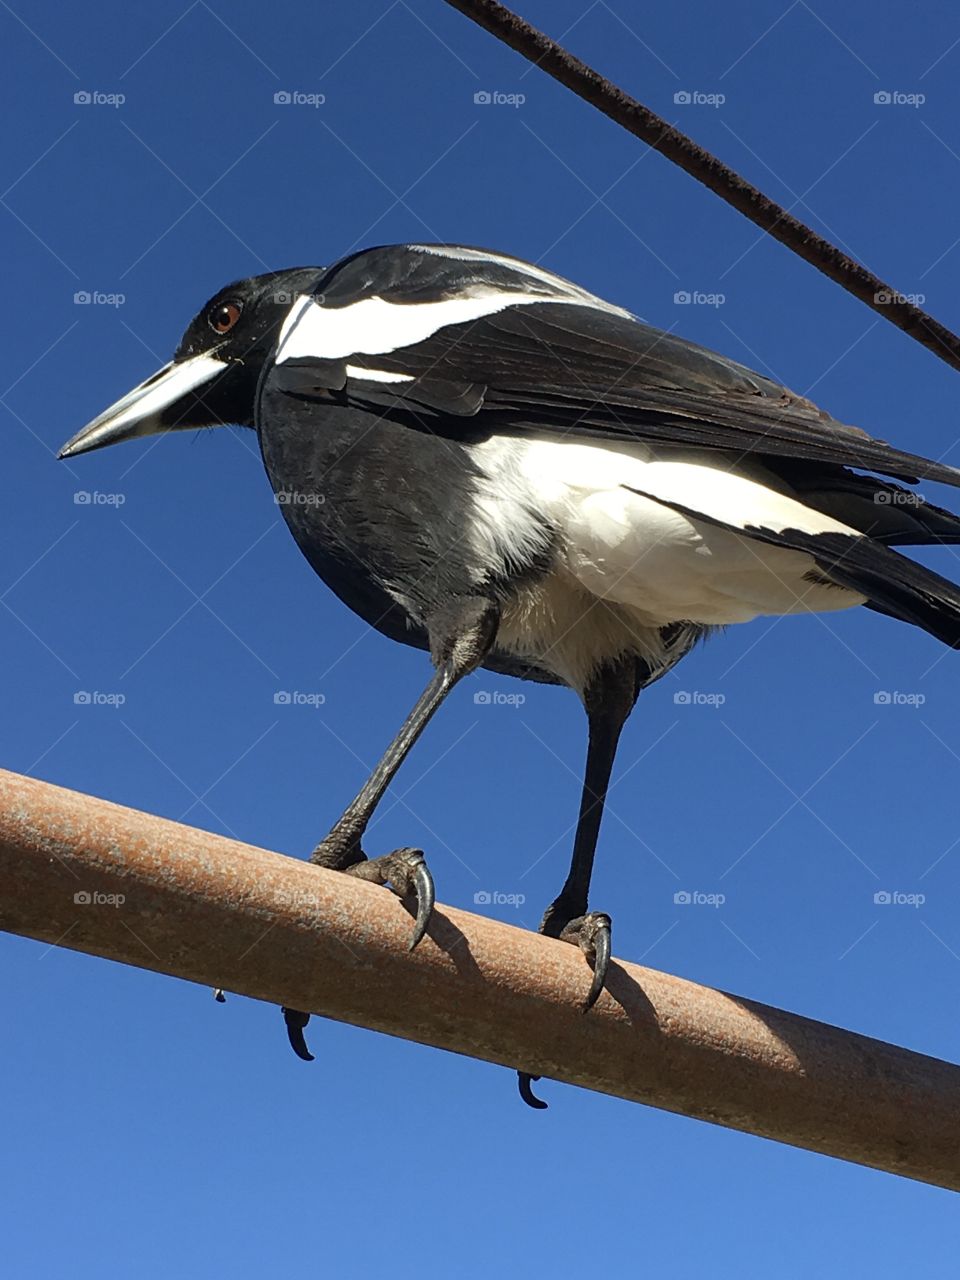 Australian magpie closeup, back view plumage, angled from ground up